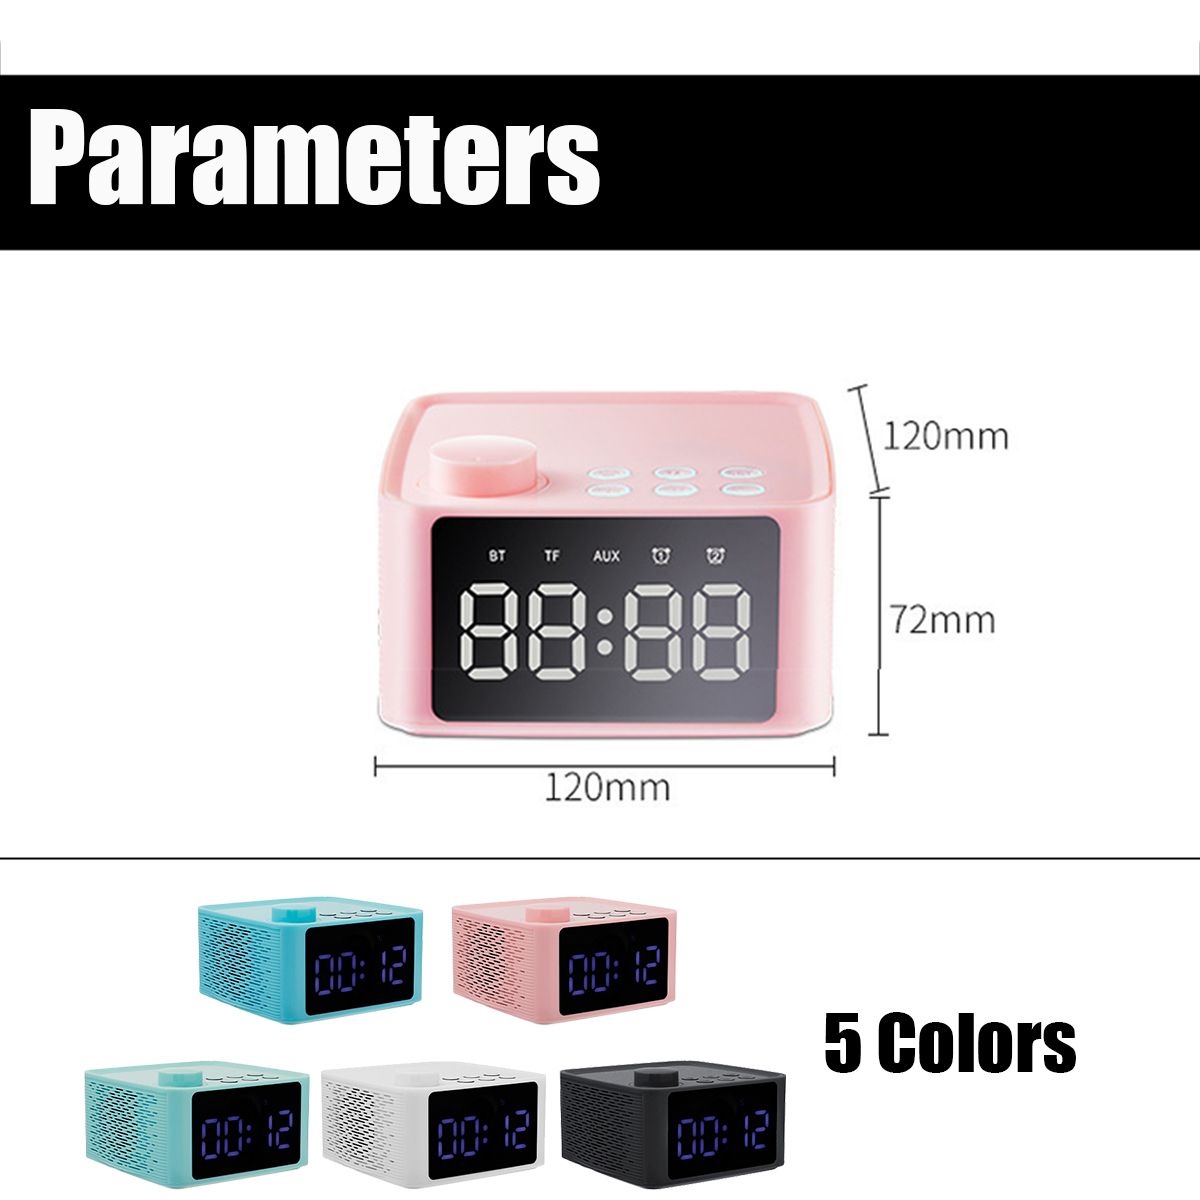 2-In-1-Wireless-Stereo-bluetooth-50-Speaker-Dual-Alarm-Clock-Subwoofer-Hifi-Music-Player-With-Phone--1432185